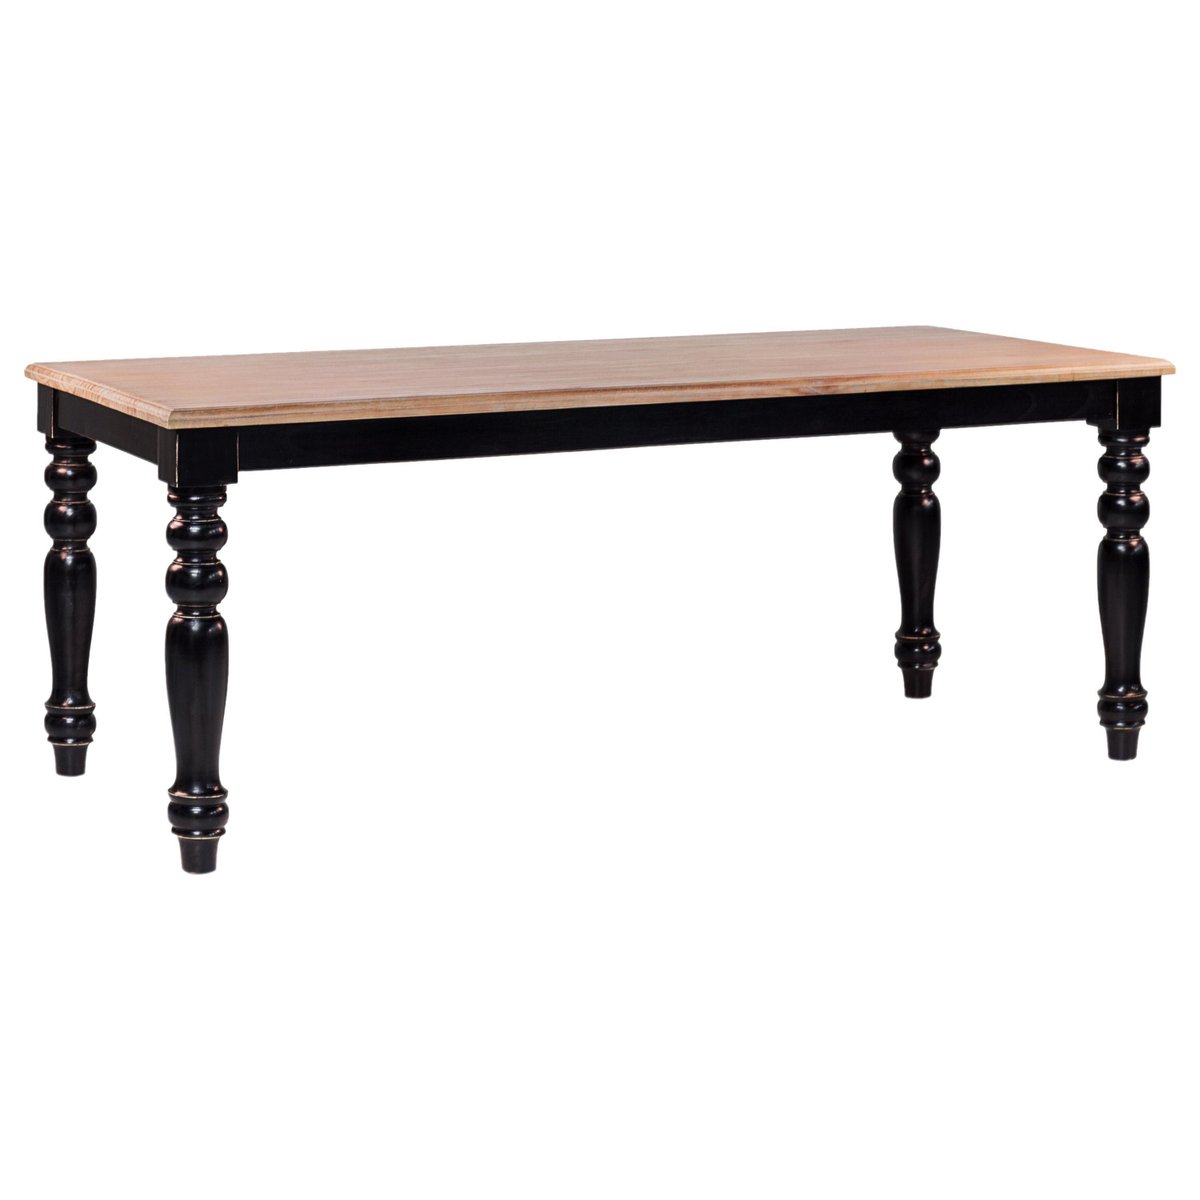 french provincial style dining room table with black ebonized legs PSK-1002446